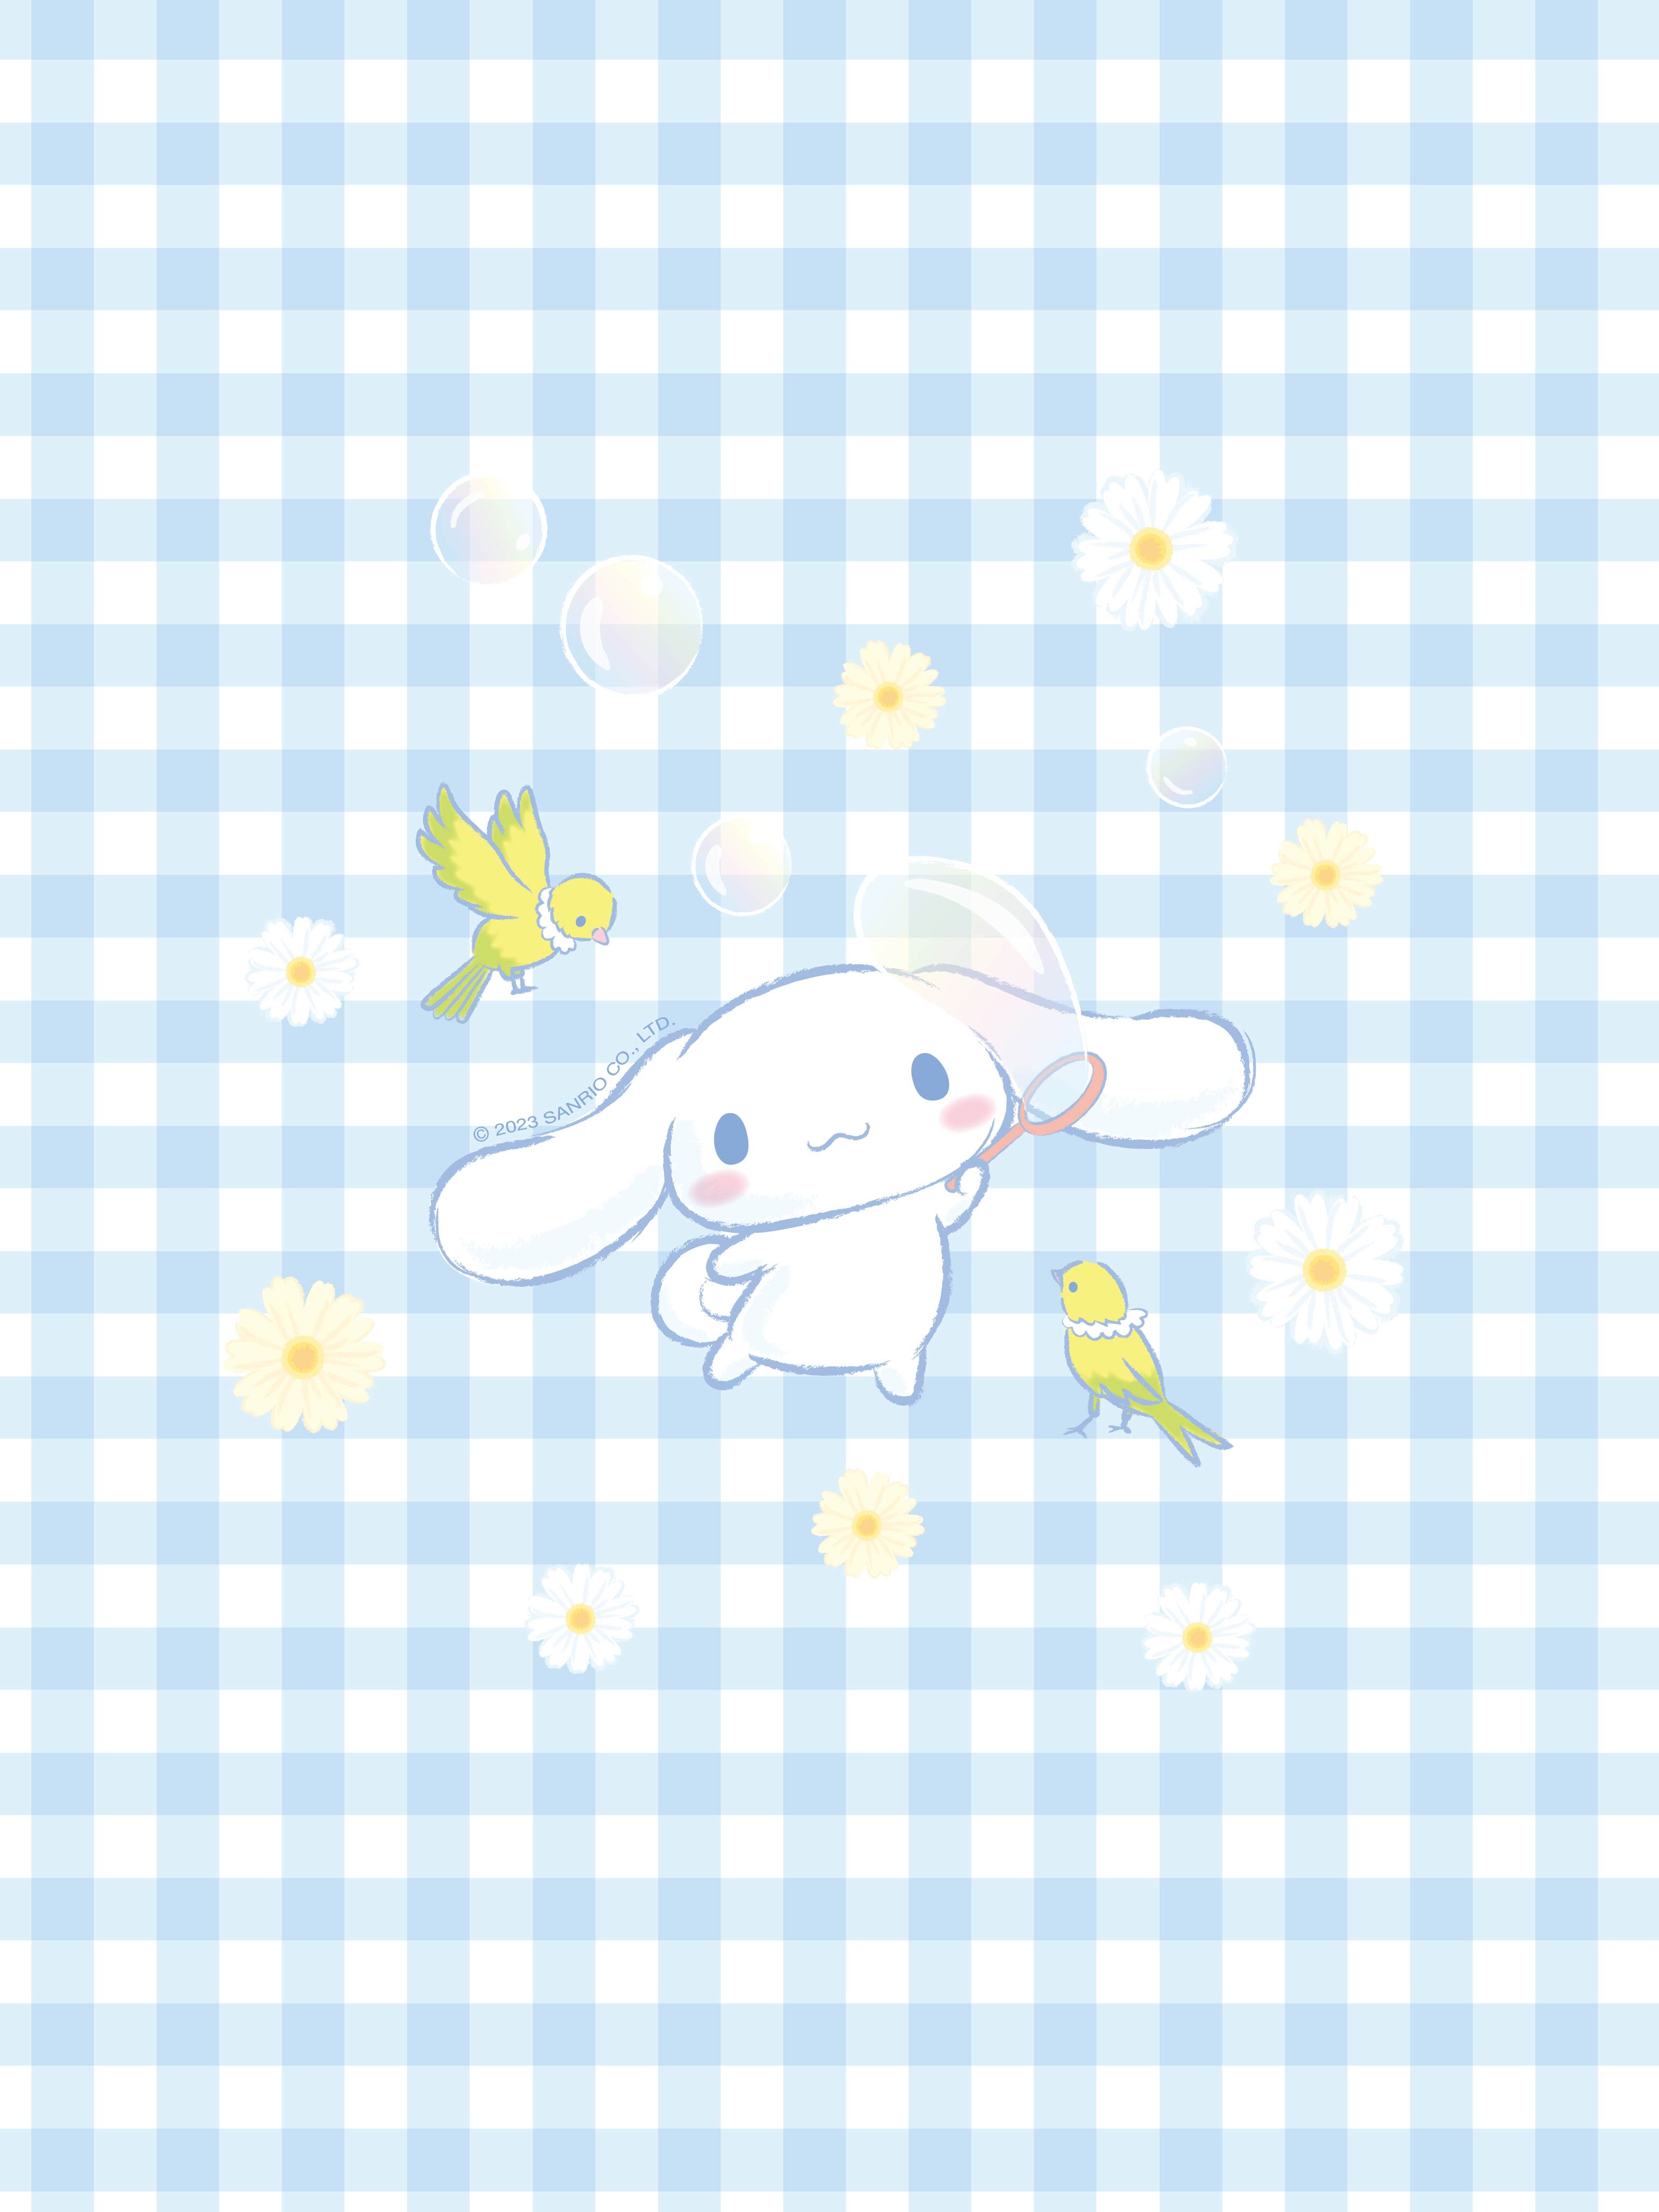 SpiderDust on X I like Sanrio So mine Is this adorable animated Cinnamoroll  Wallpaper and theme through my phone  my Home Screen is Aizawa  httpstco239ZaWTqQG  X